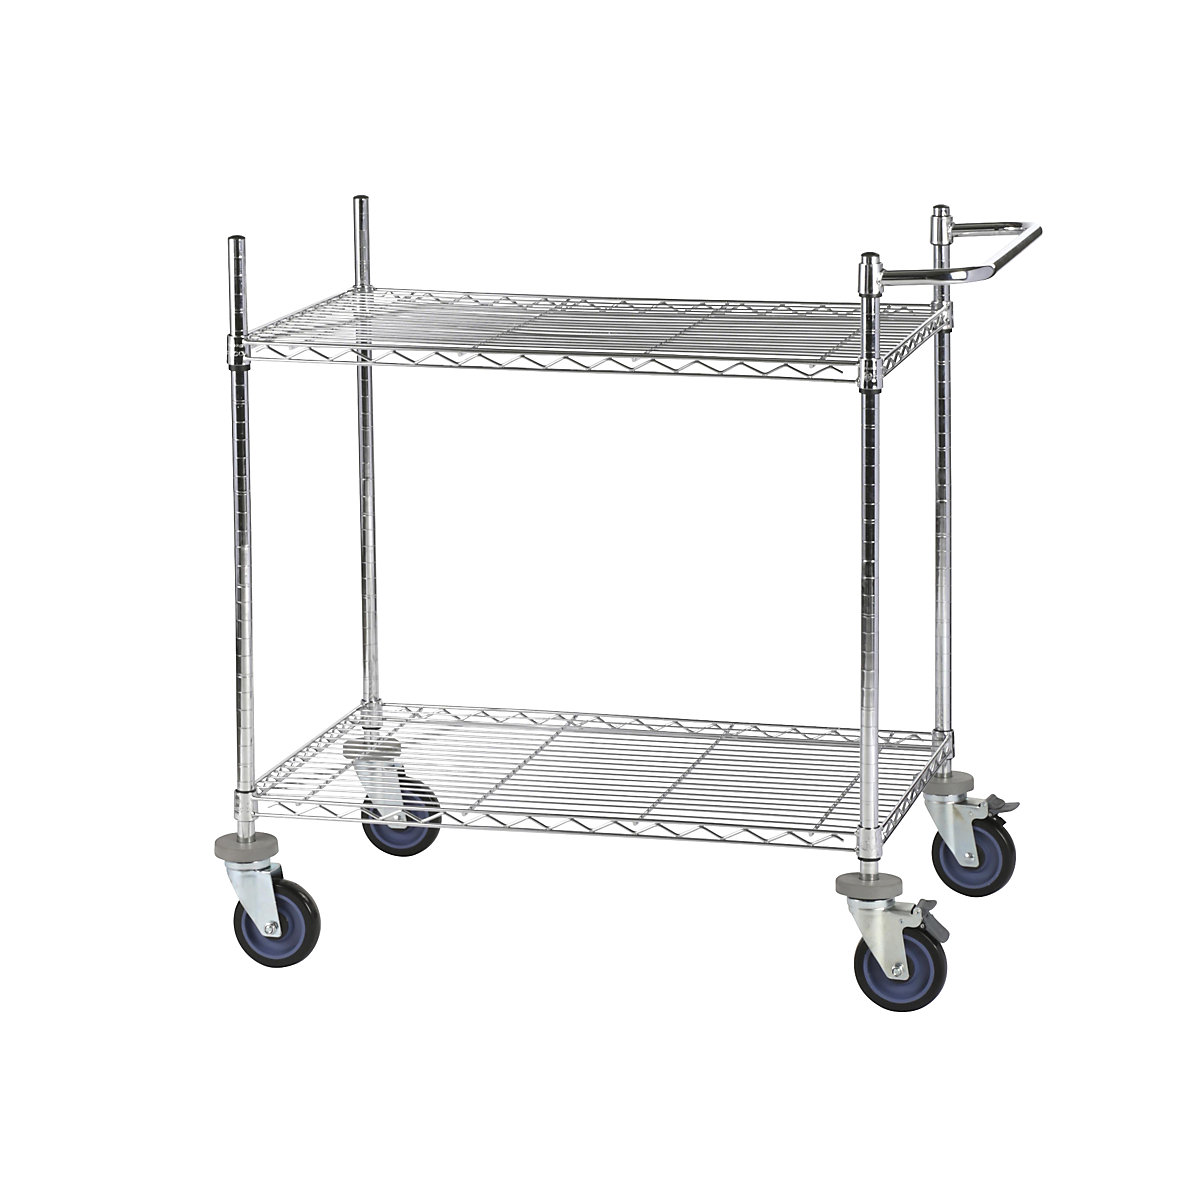 Wire mesh table trolley, chrome plated, with 2 shelves, LxWxH 910 x 610 x 1025 mm-2